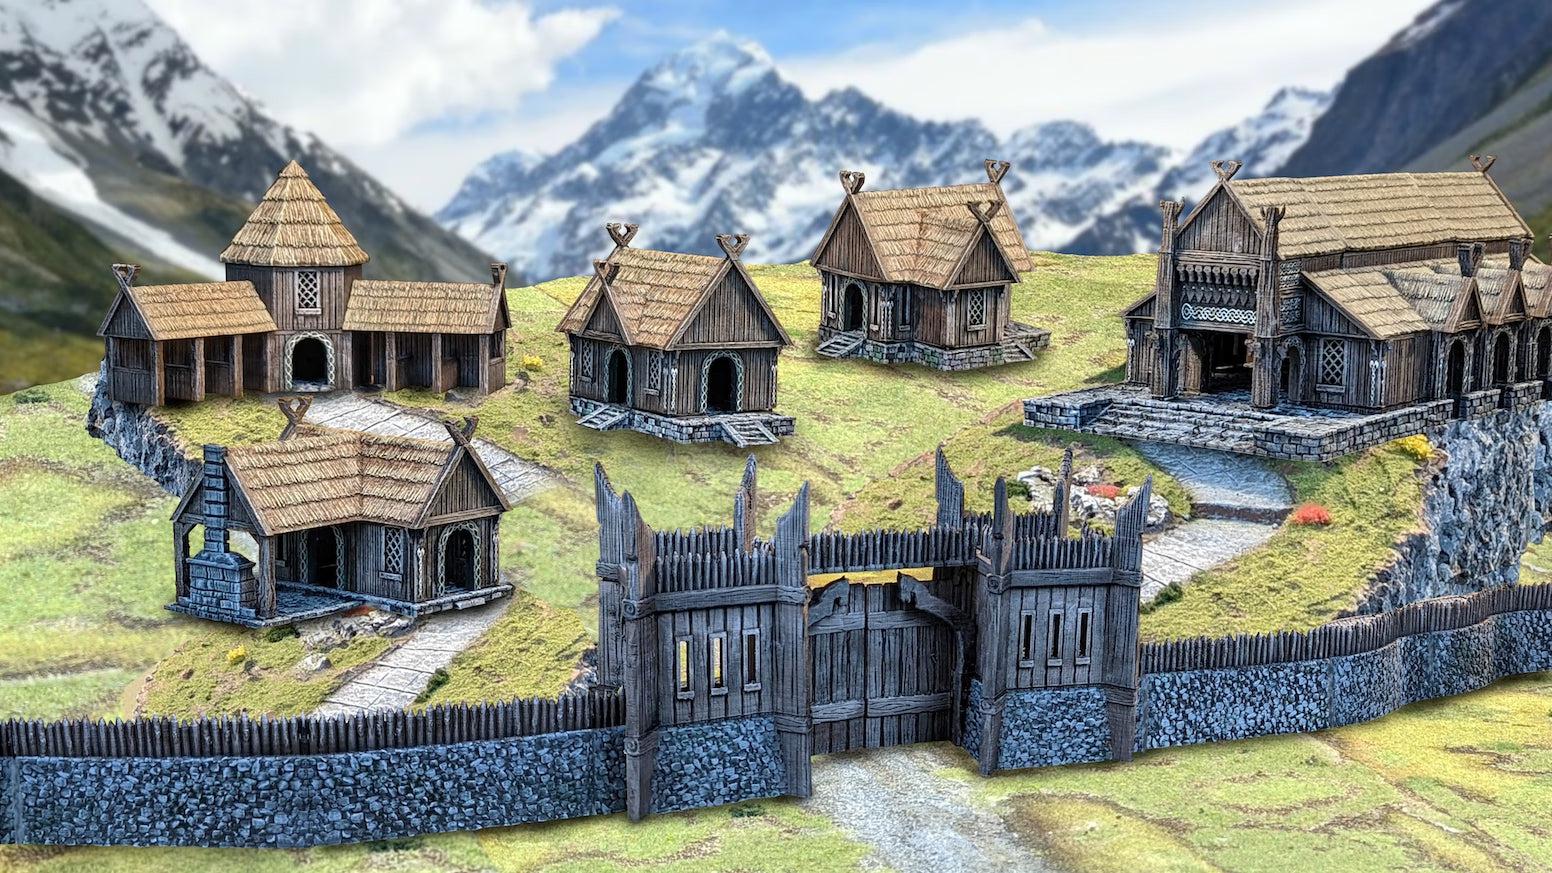 Complete Saxon Village - Kingdom of Saxonia Miniature for Dungeons and Dragons, Pathfinder or other TTRPGs